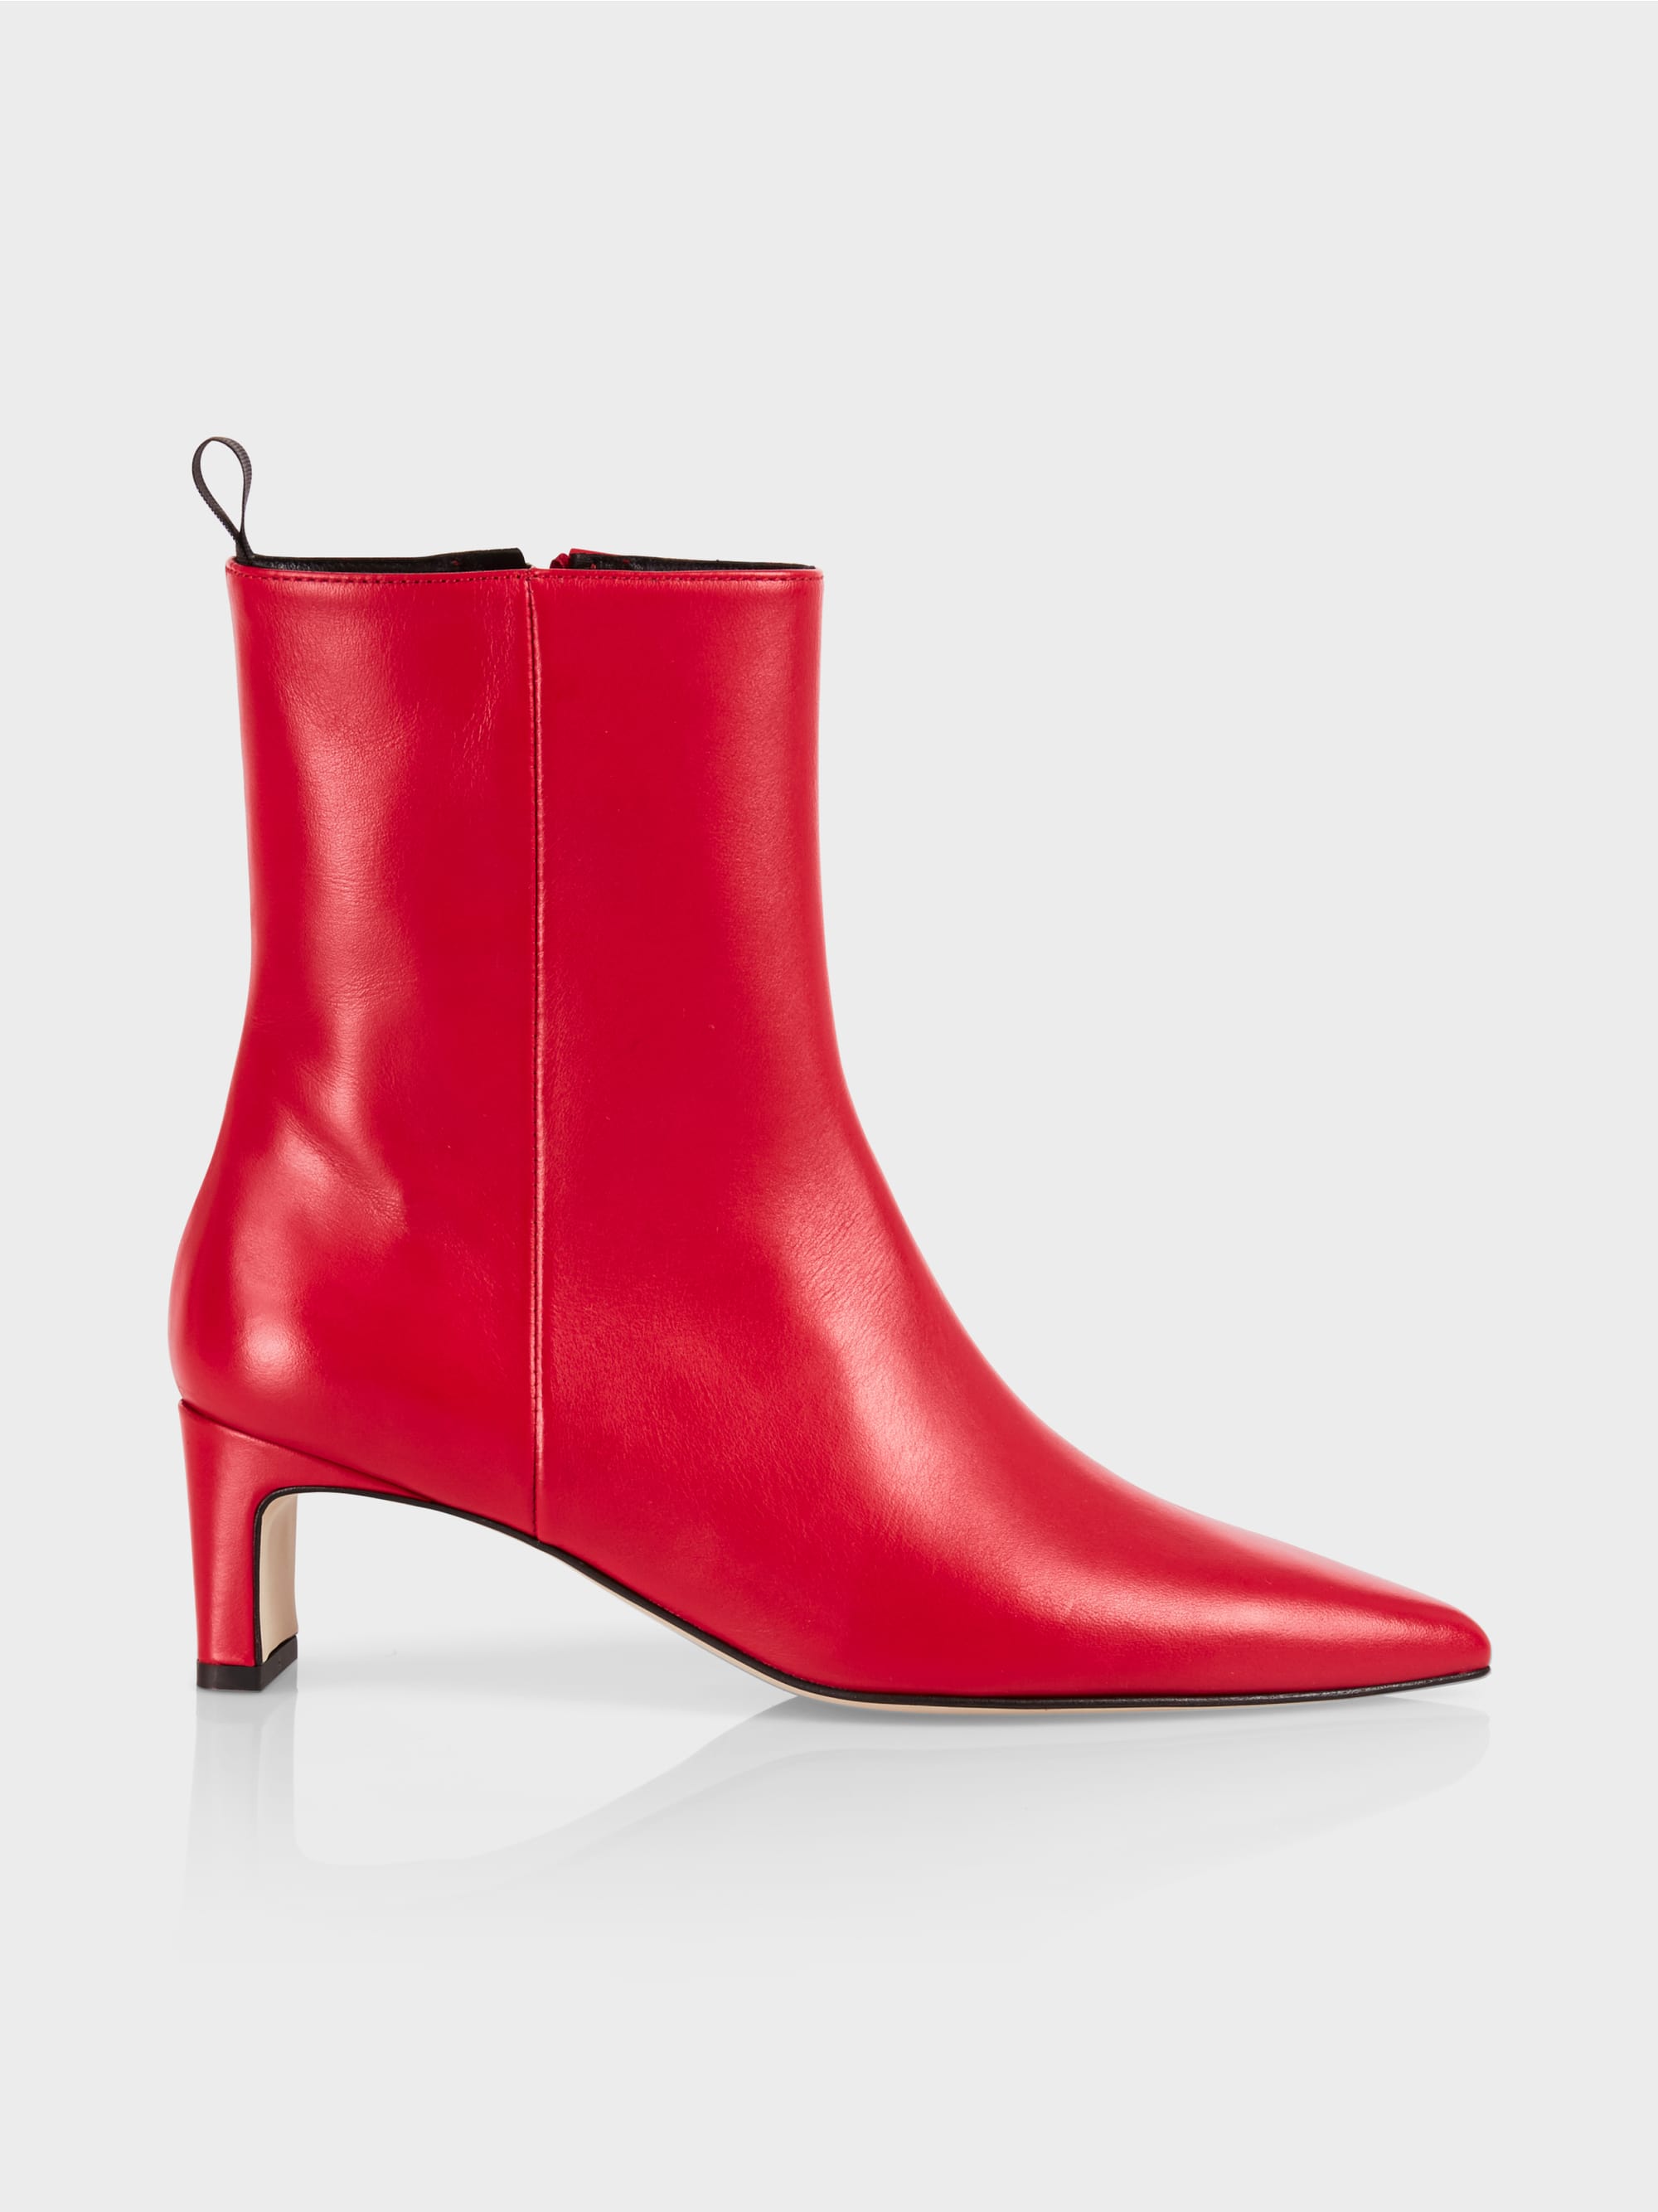 Bright Fire Red Pointed Leather Heeled Boots